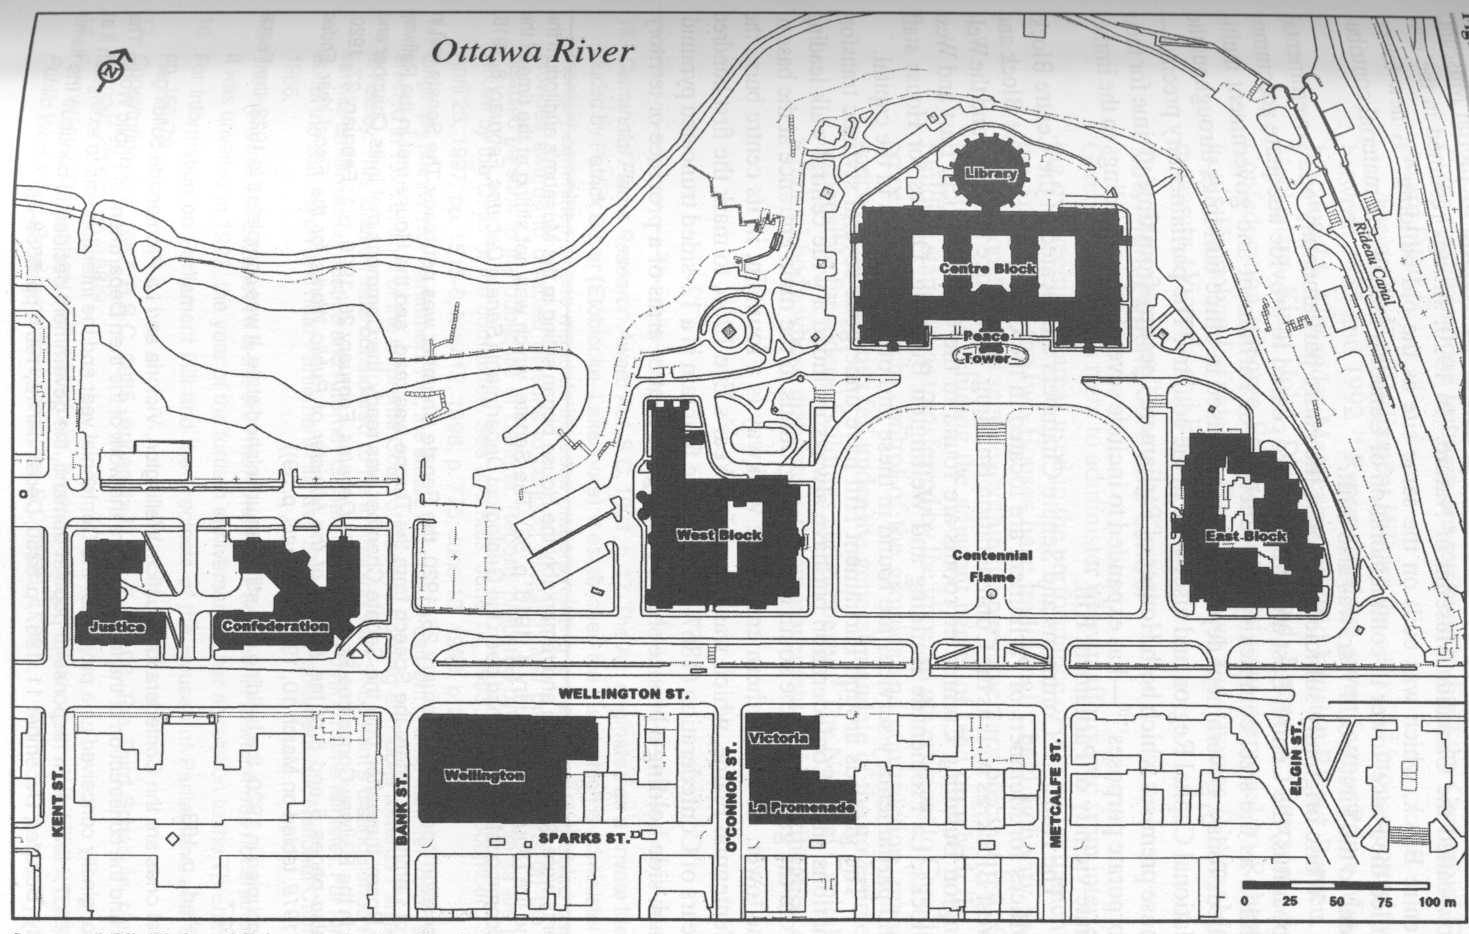 Image depicting a map of the buildings in and area around the Parliamentary Precinct. To the left of the image (at the West side of the Precinct) are the Justice and Confederation Buildings, bordered on the South by Wellington Street and on the North by a hill leading down to the Ottawa River. To the right of these buildings on the image (slightly to the East) are the West Block the Centre Block and East Block. These too are bordered by Wellington Street and the Ottawa River. To the south of Wellington Street, along the bottom of the image, are the Wellington Building, bordered by Bank and Wellington Streets; the Victoria Building, at the corner of O’Connor and Wellington Streets; and La Promenade Building, found at the corner of O’Connor and Sparks Streets.